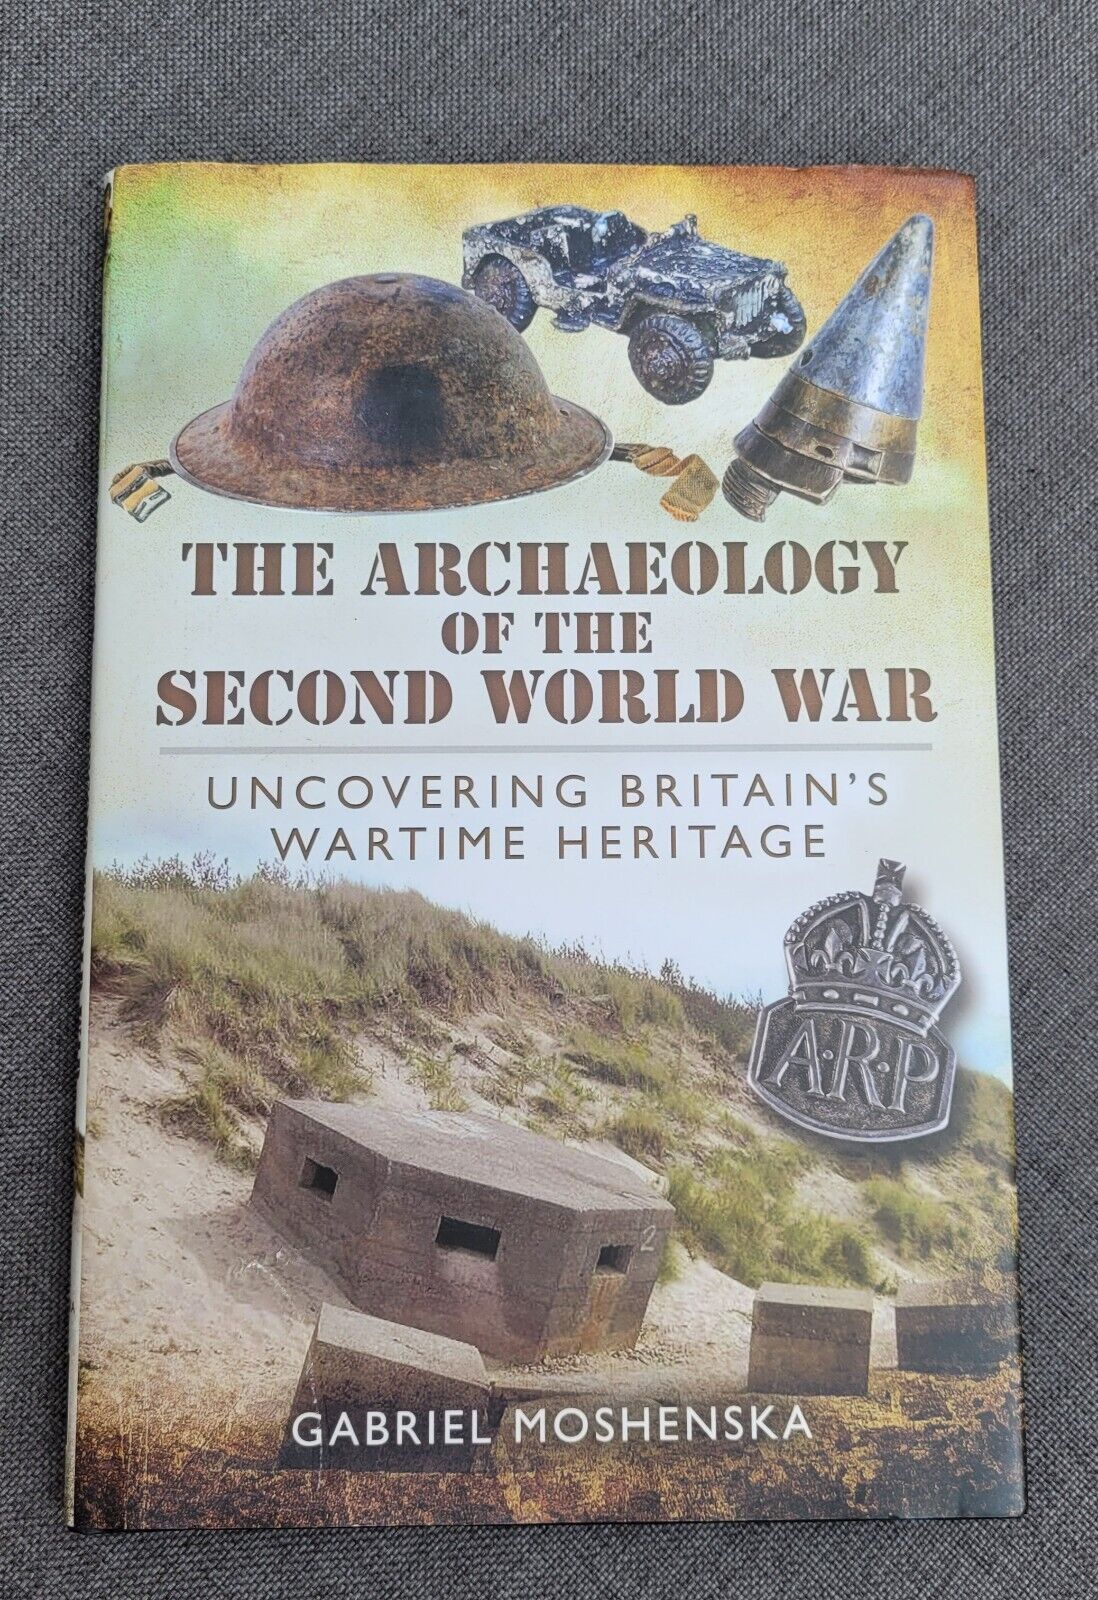 THE ARCHAEOLOGY OF THE SECOND WORLD WAR BOOK